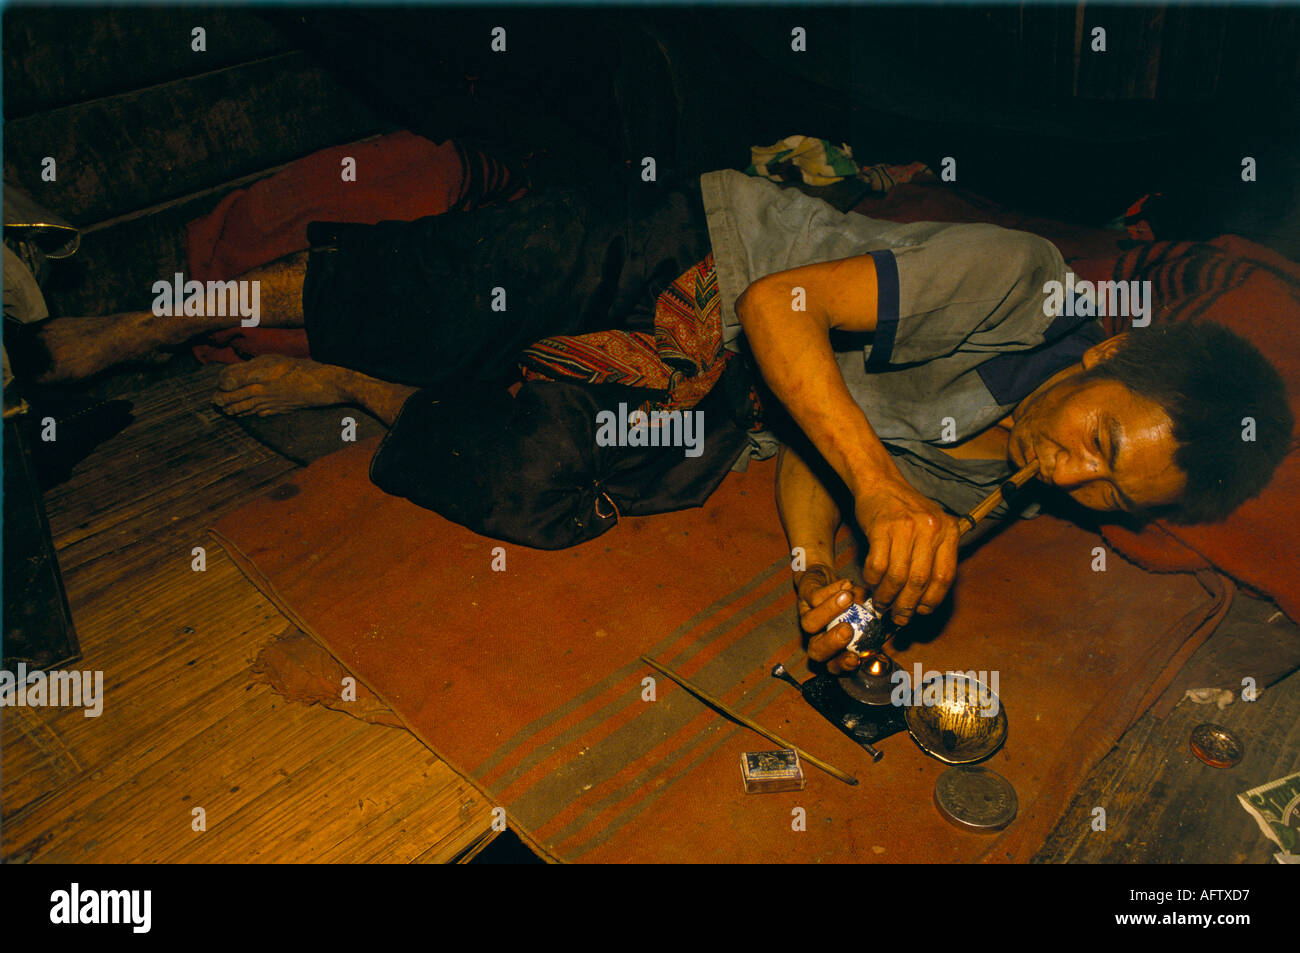 Opium addict, Drug addiction tribesman Northern Thailand. South East Asia Chiang Rai province, 1990s 90s HOMER SYKES Stock Photo